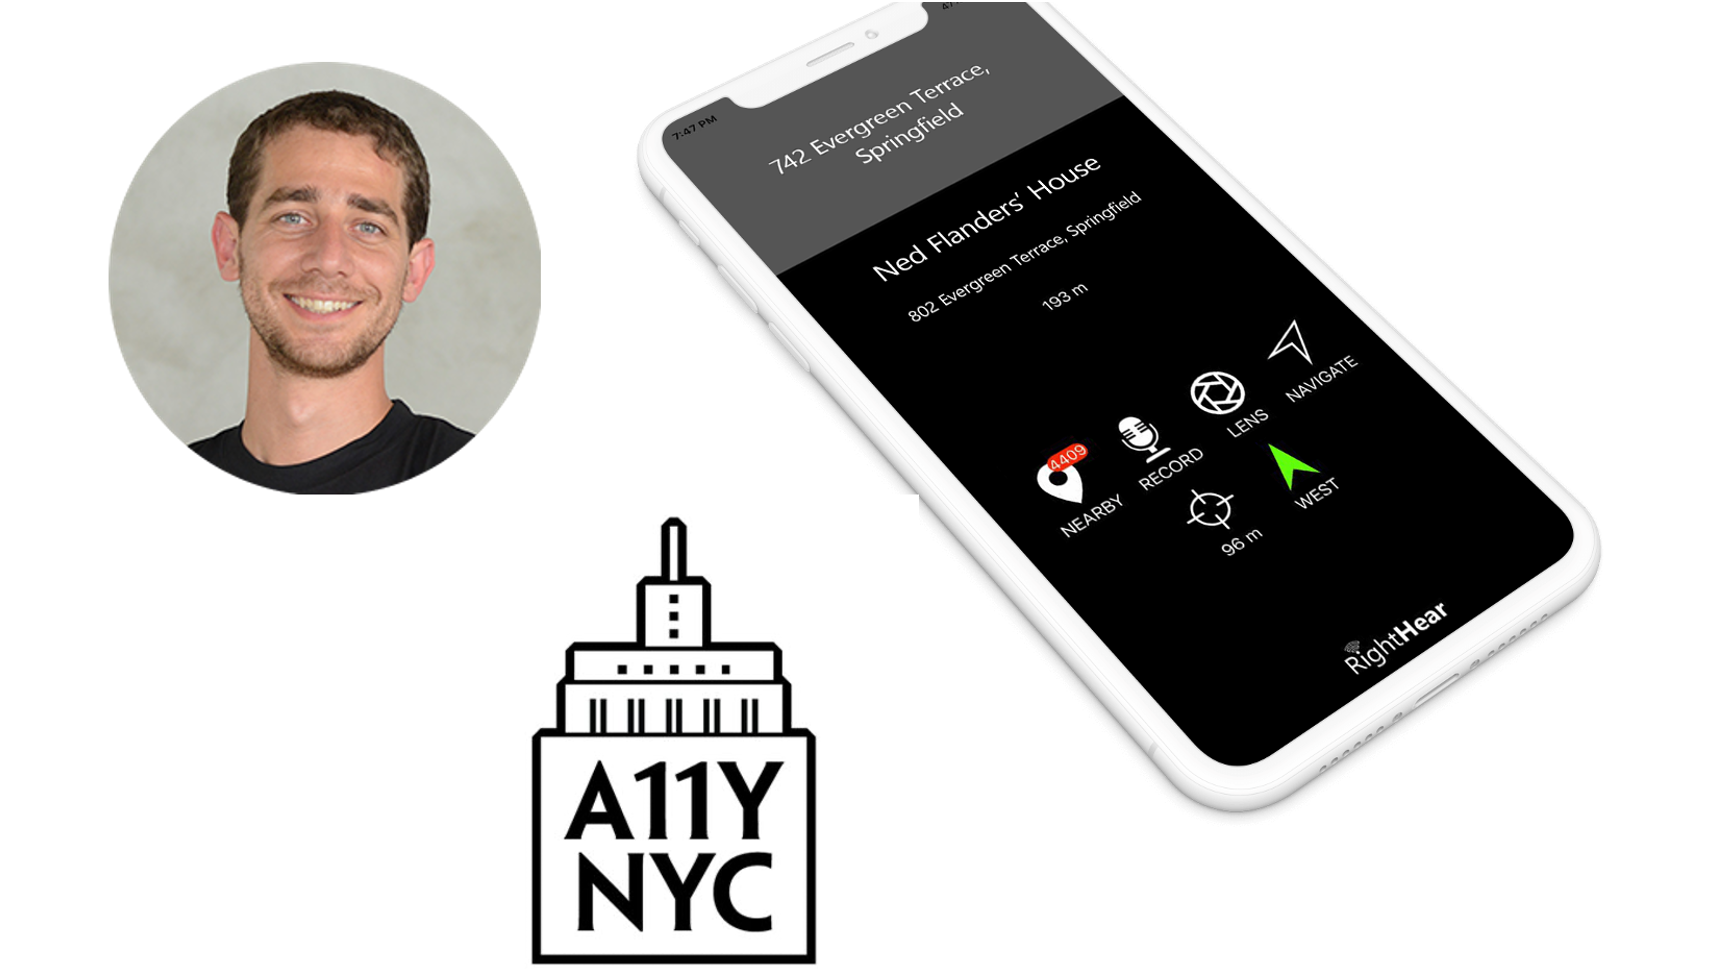 CEO of Right Hear Idan Meir with phone displaying technology and A11yNYC Meetup logo